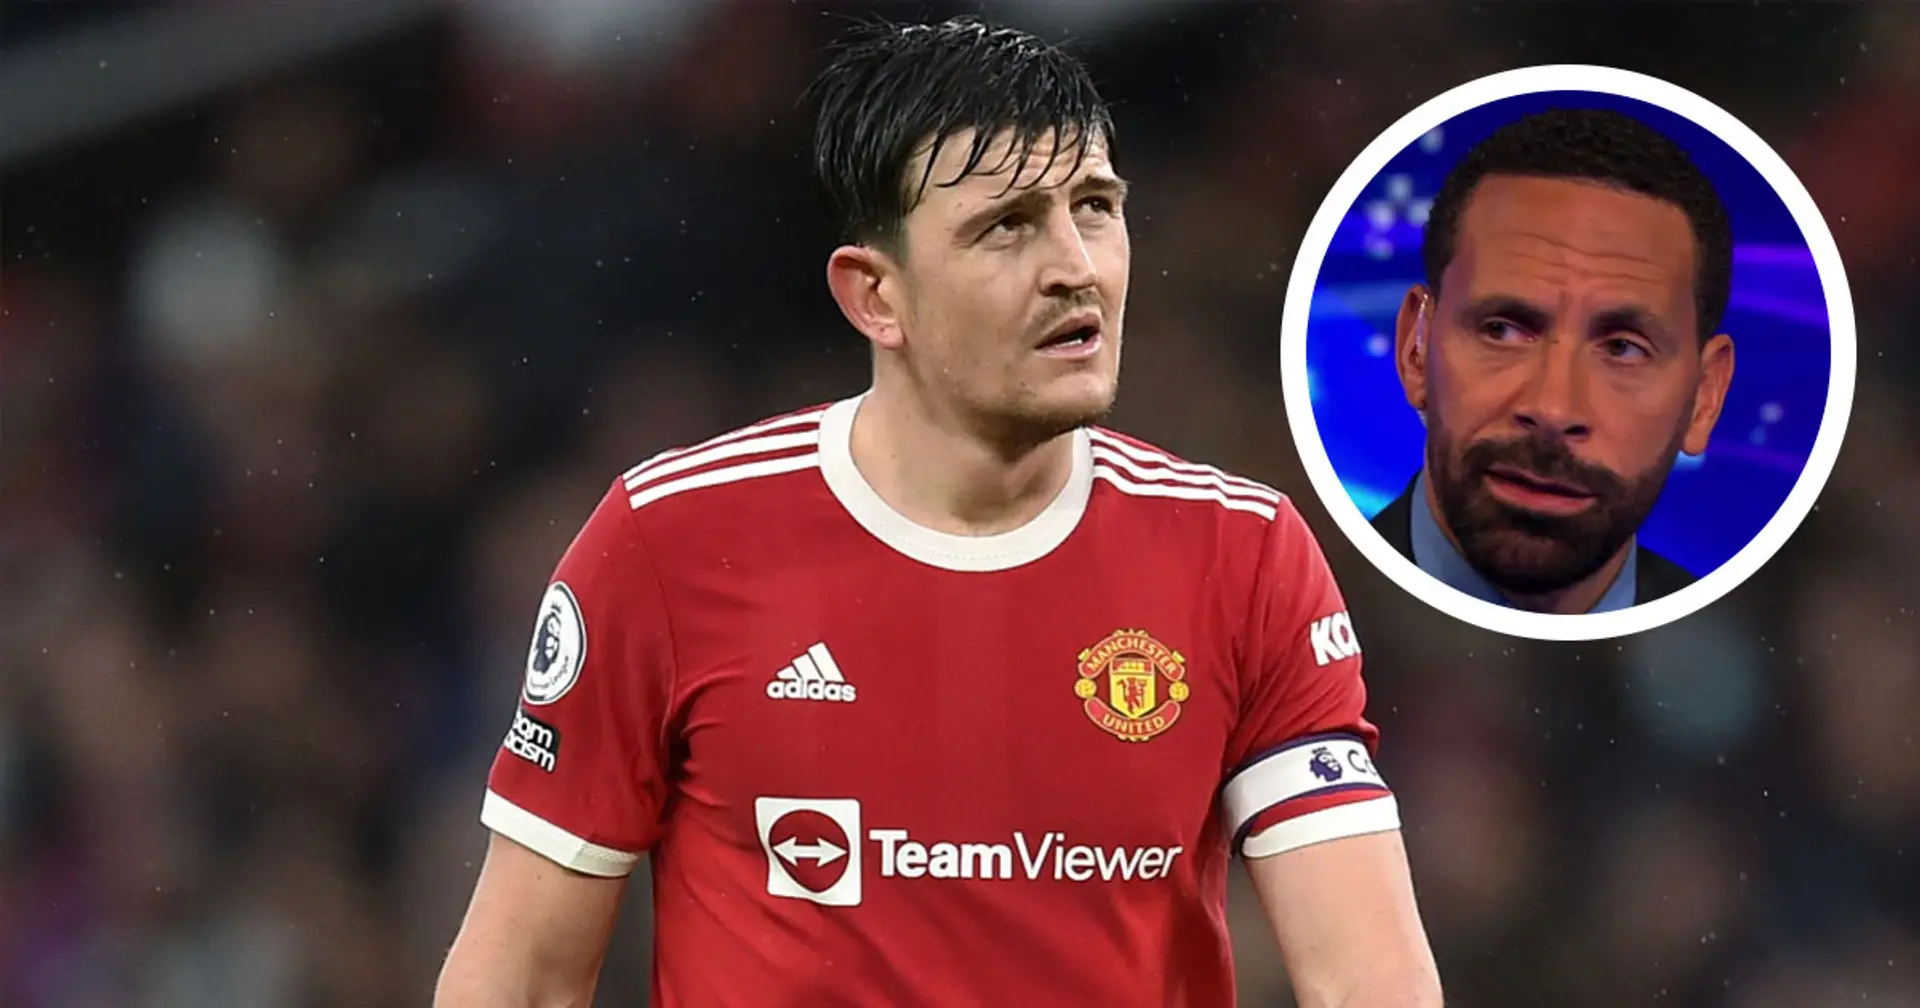 Rio Ferdinand: 'Is Maguire going to win you the league? That's a question'